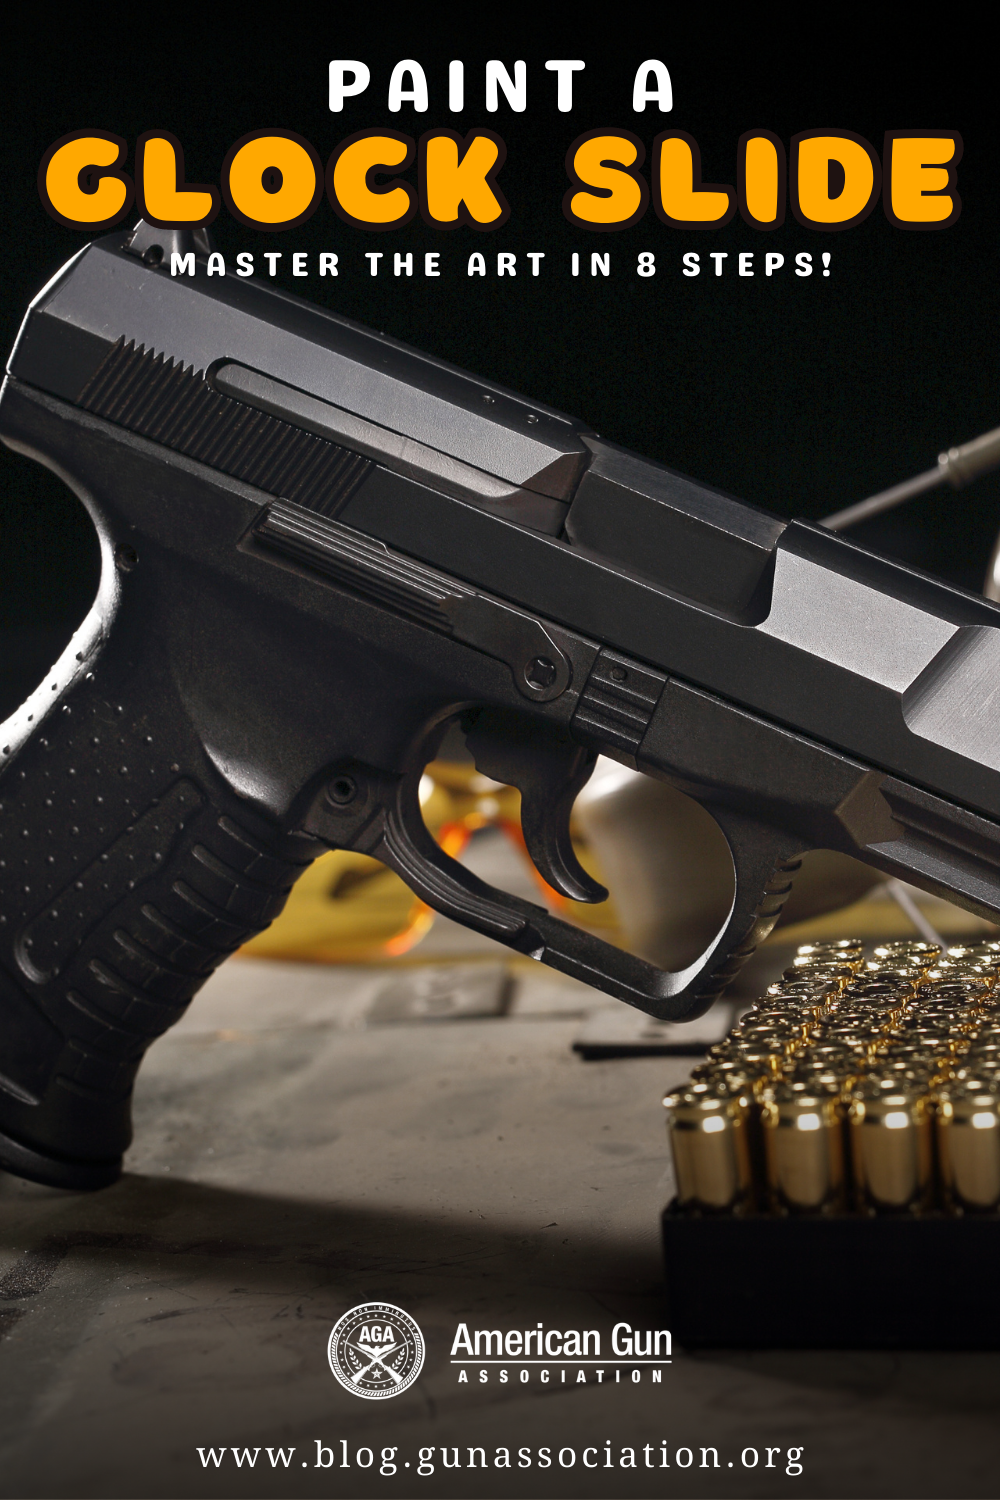 Paint a Glock Slide Like a Pro_ Master the Art in 8 Steps!